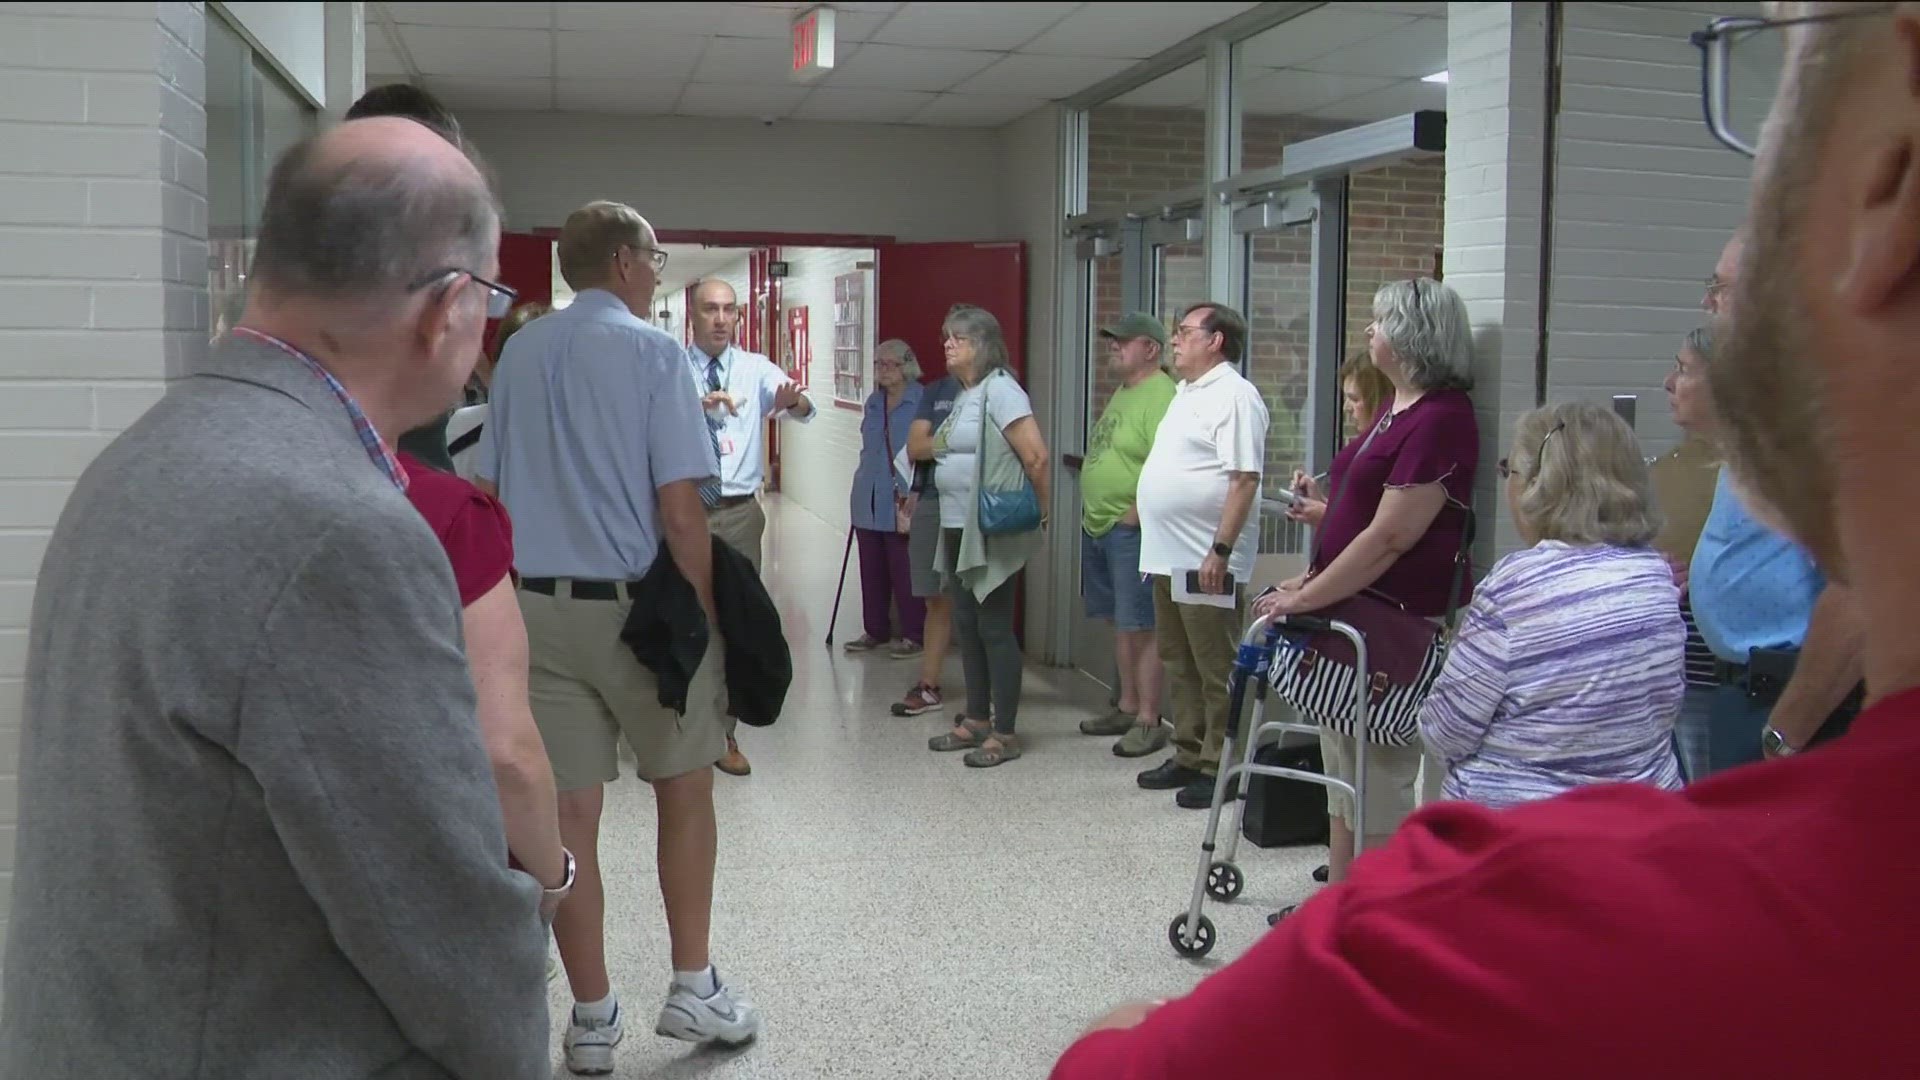 The Bowling Green School District is trying to pass a levy to build a new high school. The district has tried before and each time the voters have said no.